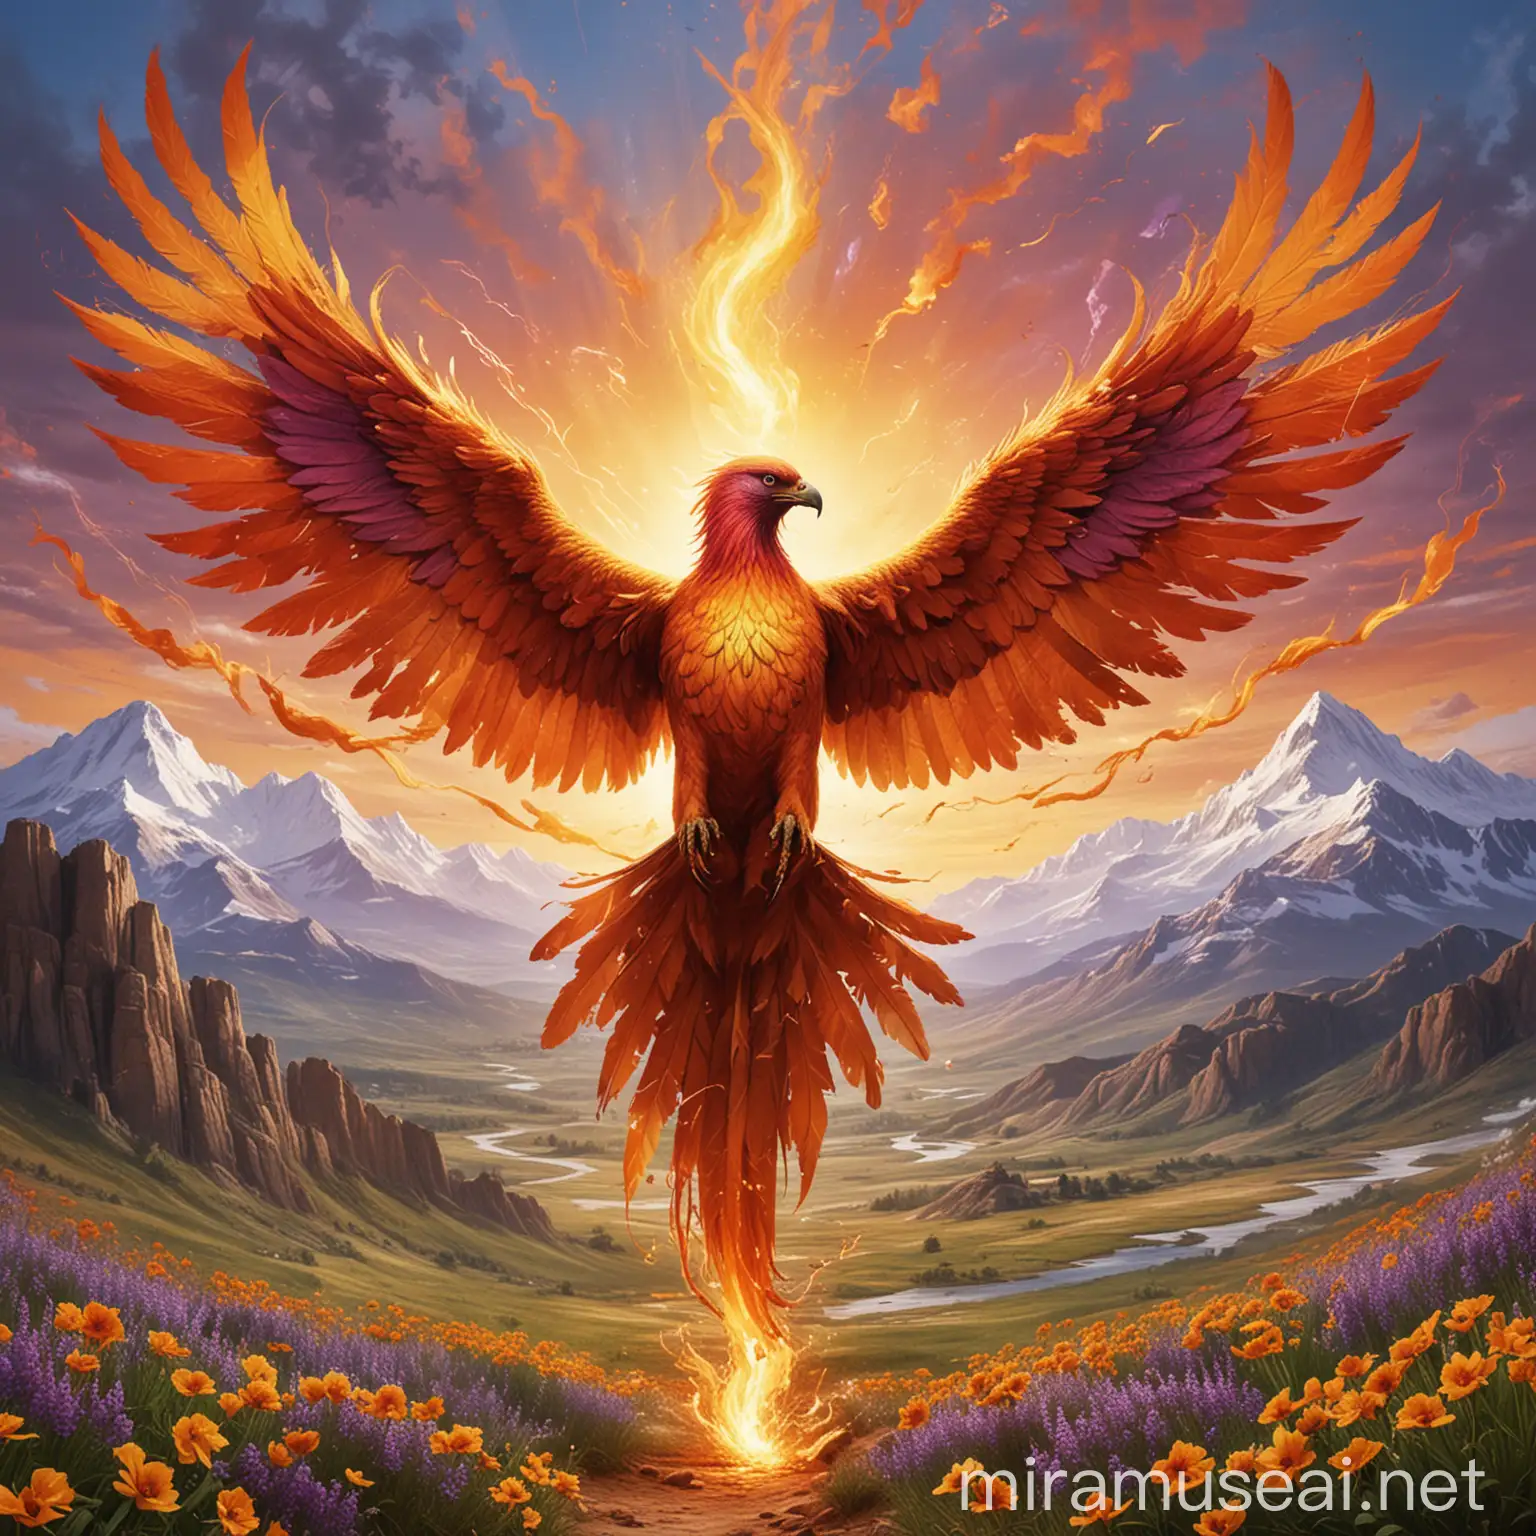 Phoenix Breaking Free from Chains Symbolizing Freedom and Recovery from Addiction